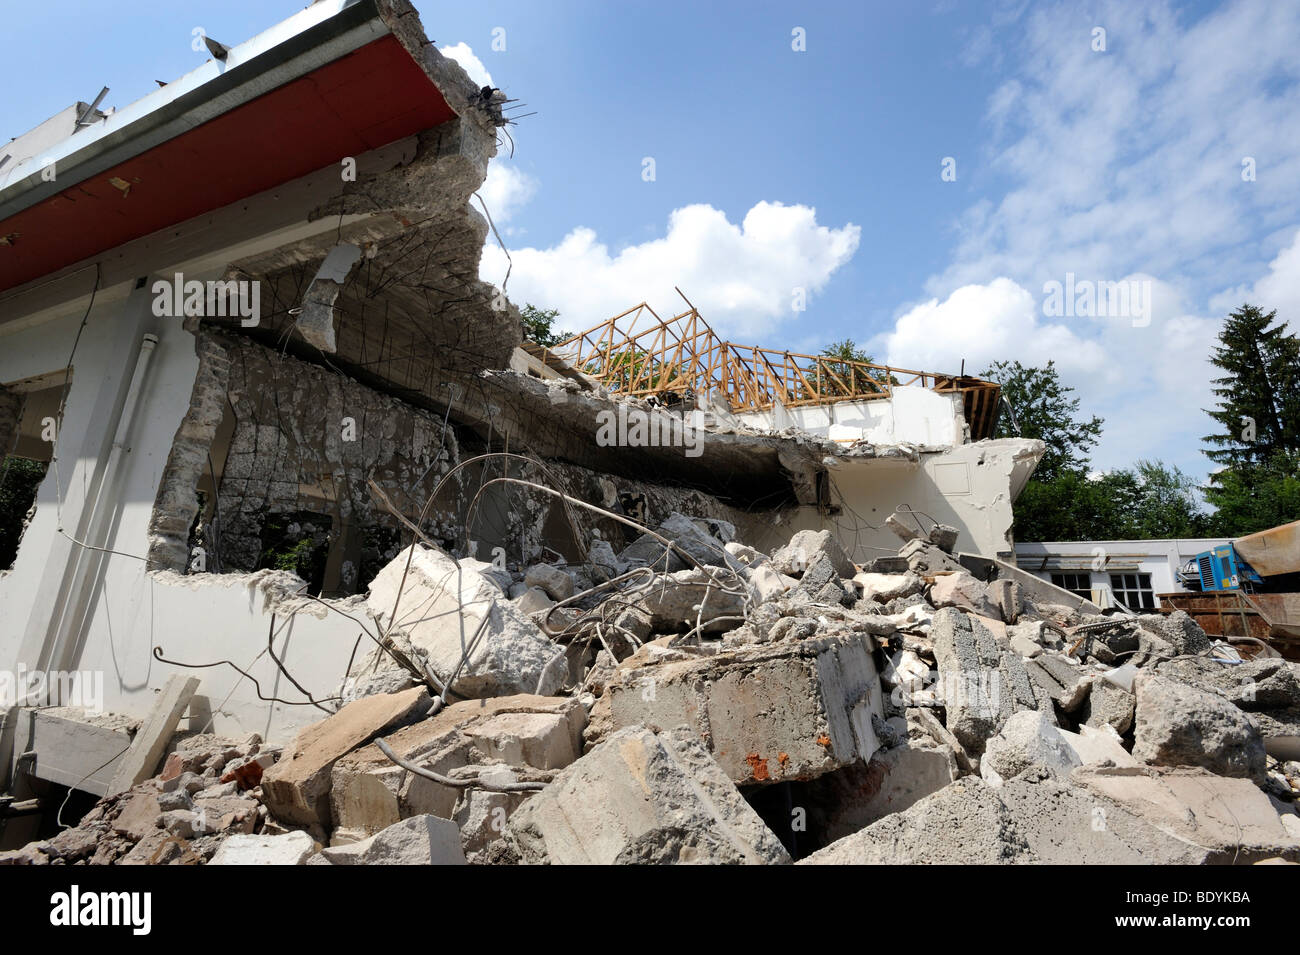 Demolition work on an old bunker, company building Stock Photo